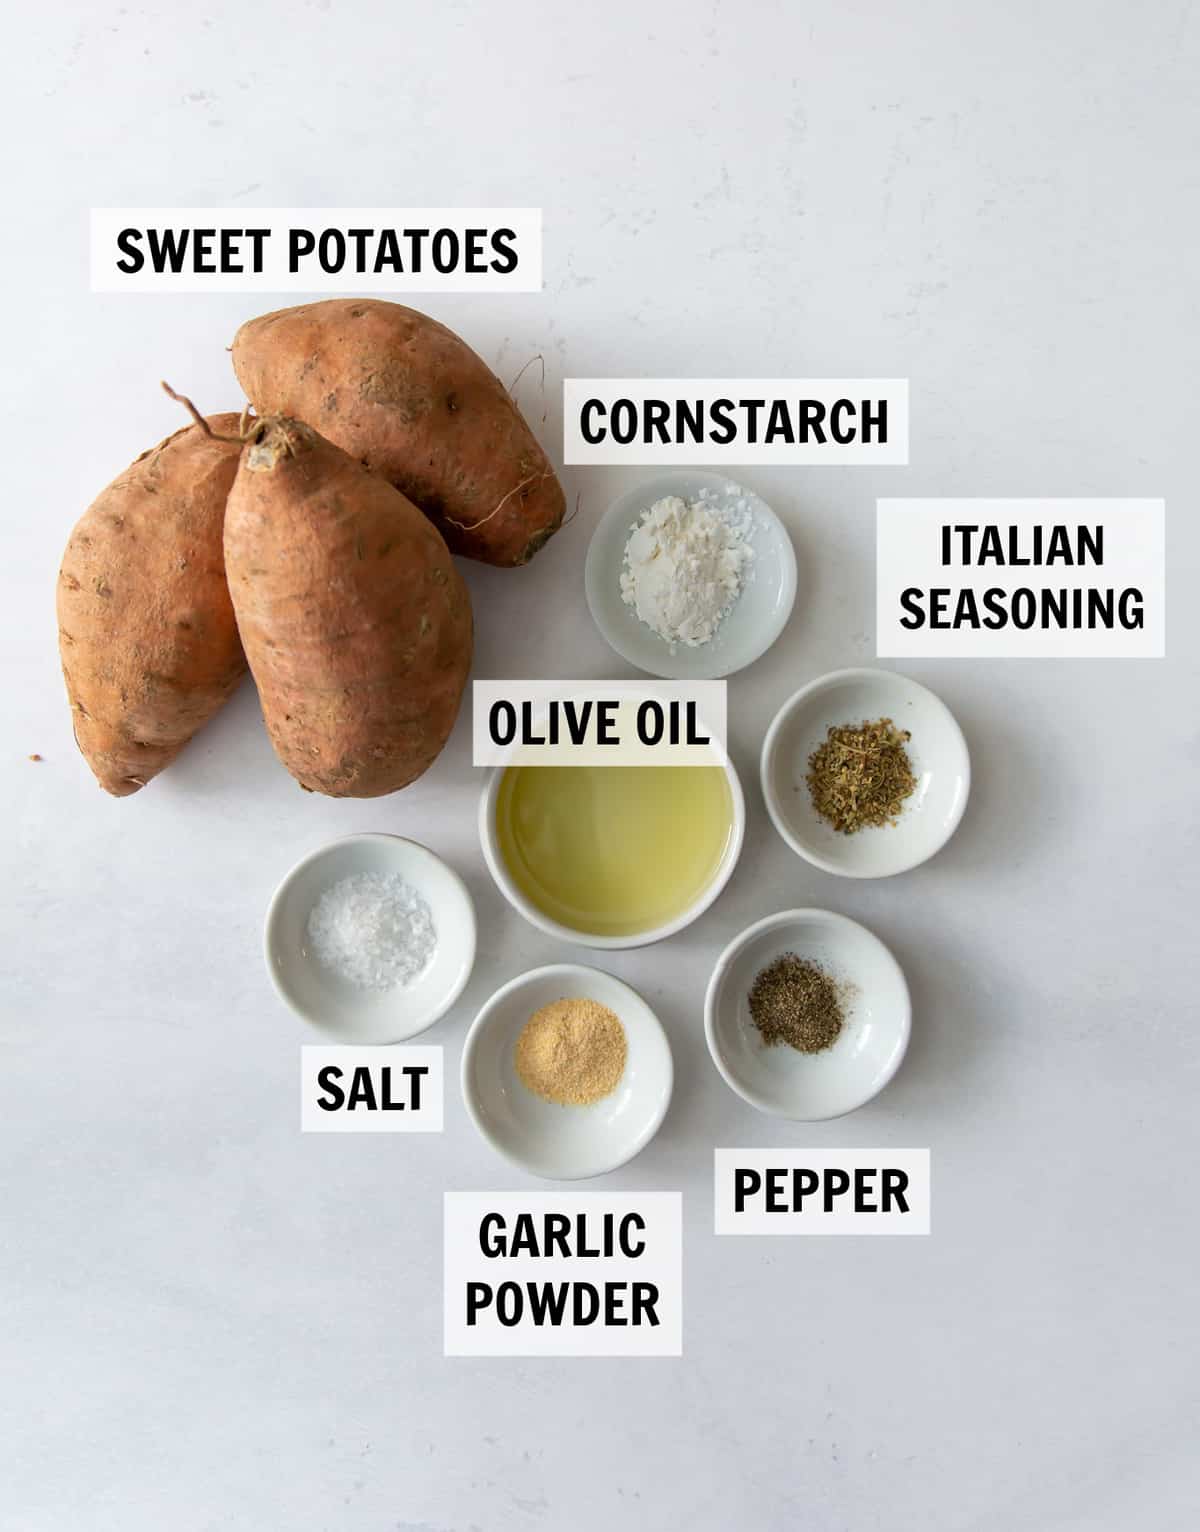 ingredients for sweet potato fries on a white background